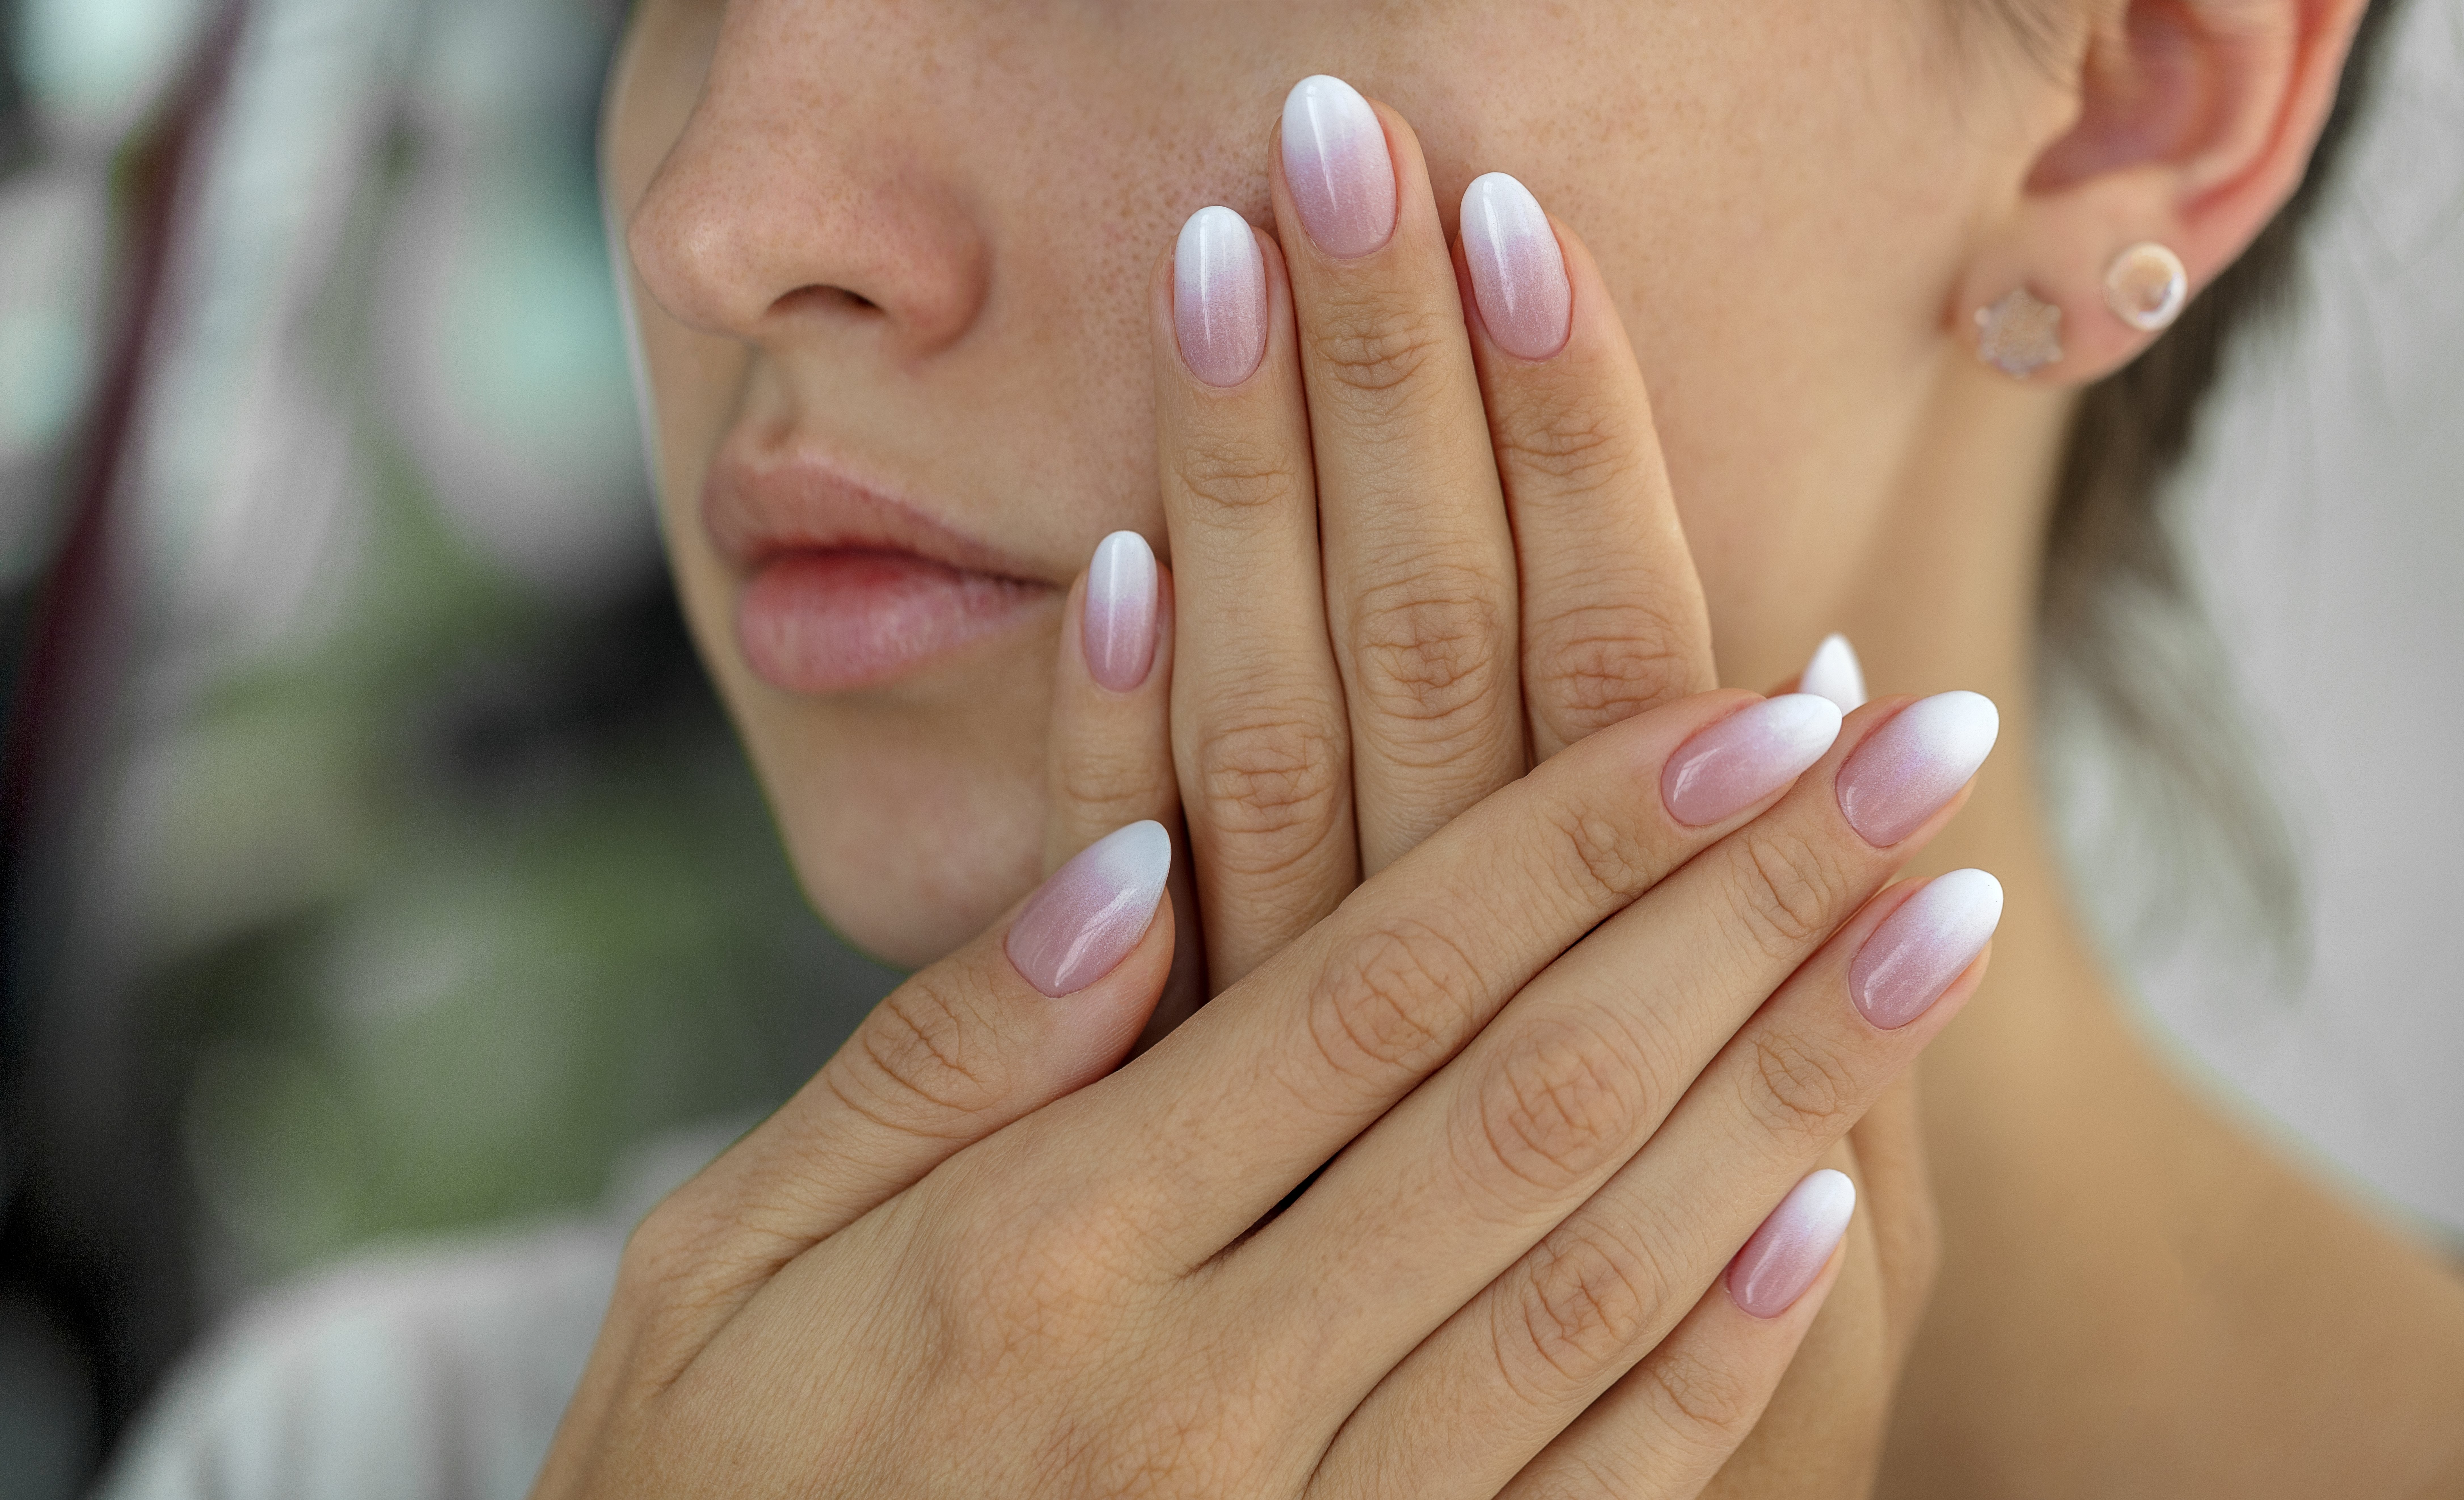 Woman's nails with peach and white almond French ombre manicure. | Source: Getty Images